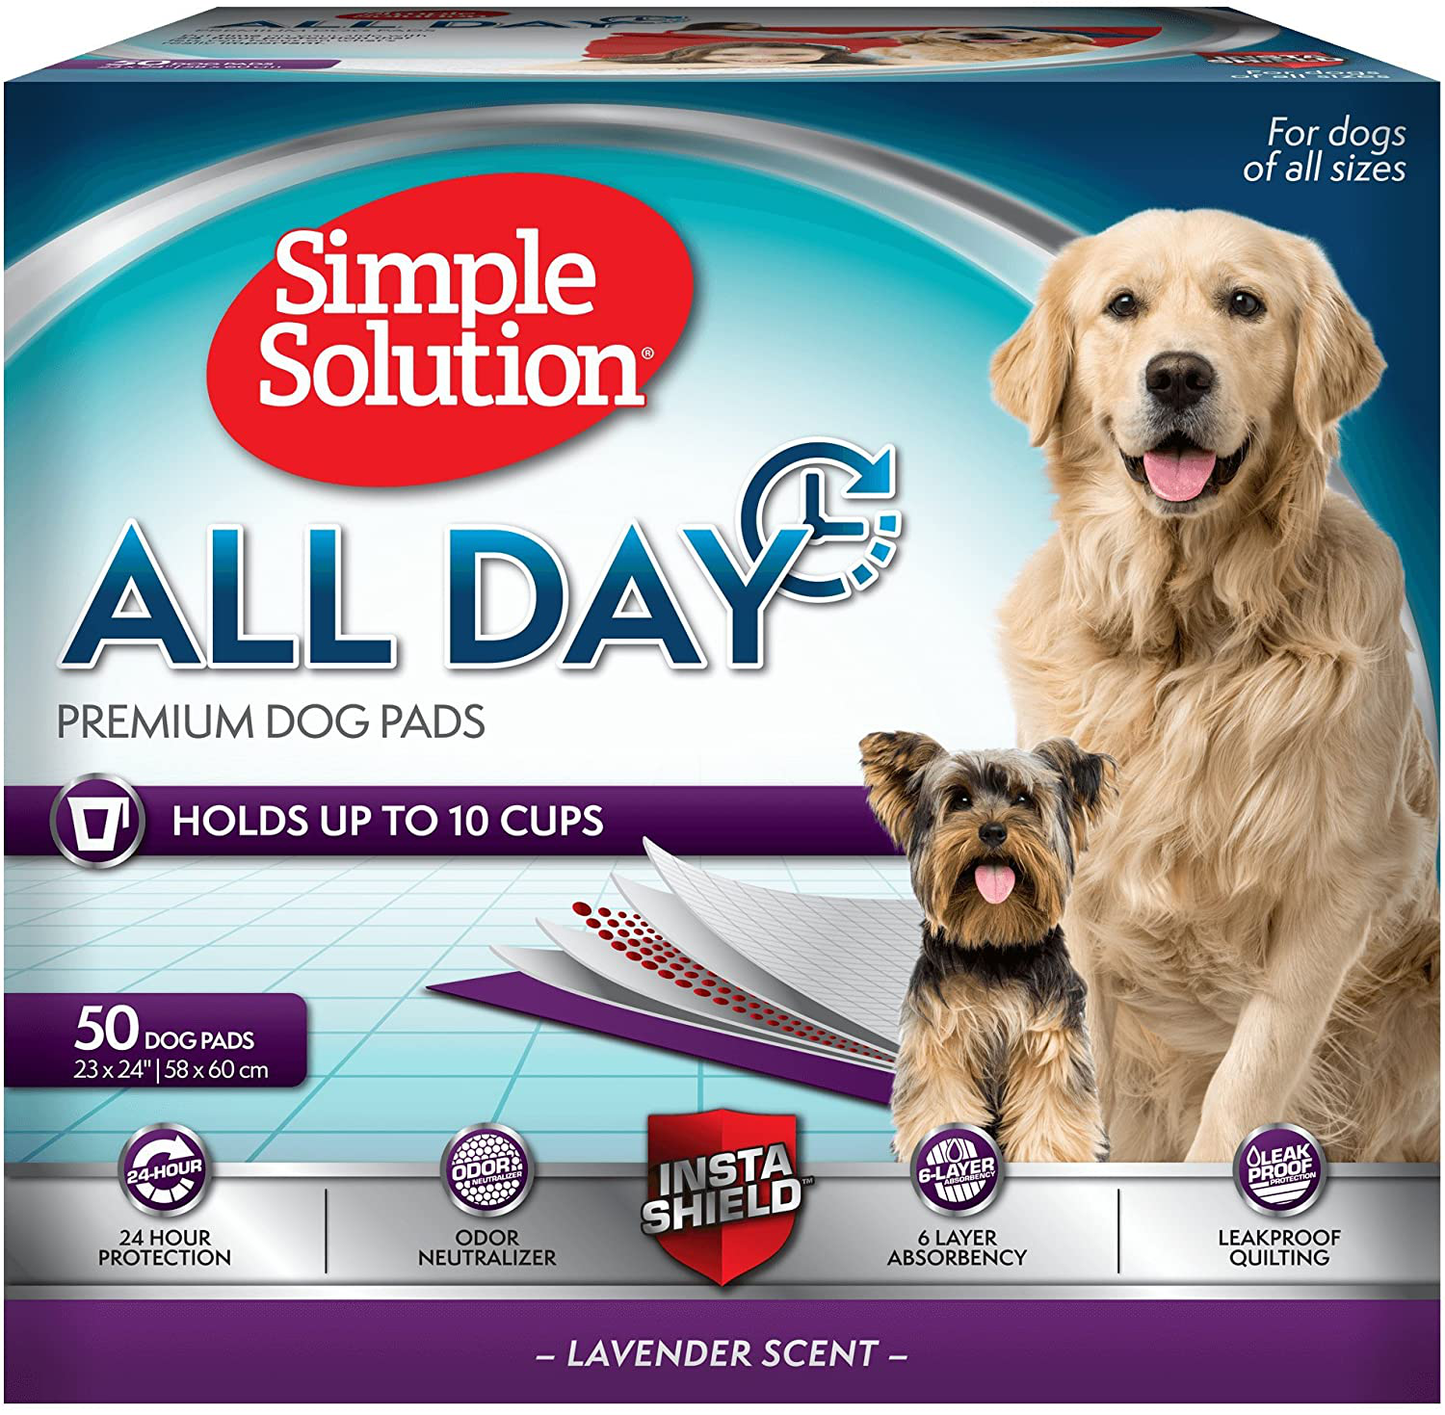 Simple Solution 6-Layer All Day Premium Dog Pads | Lavender Scent | 23 X 24 100 Pads